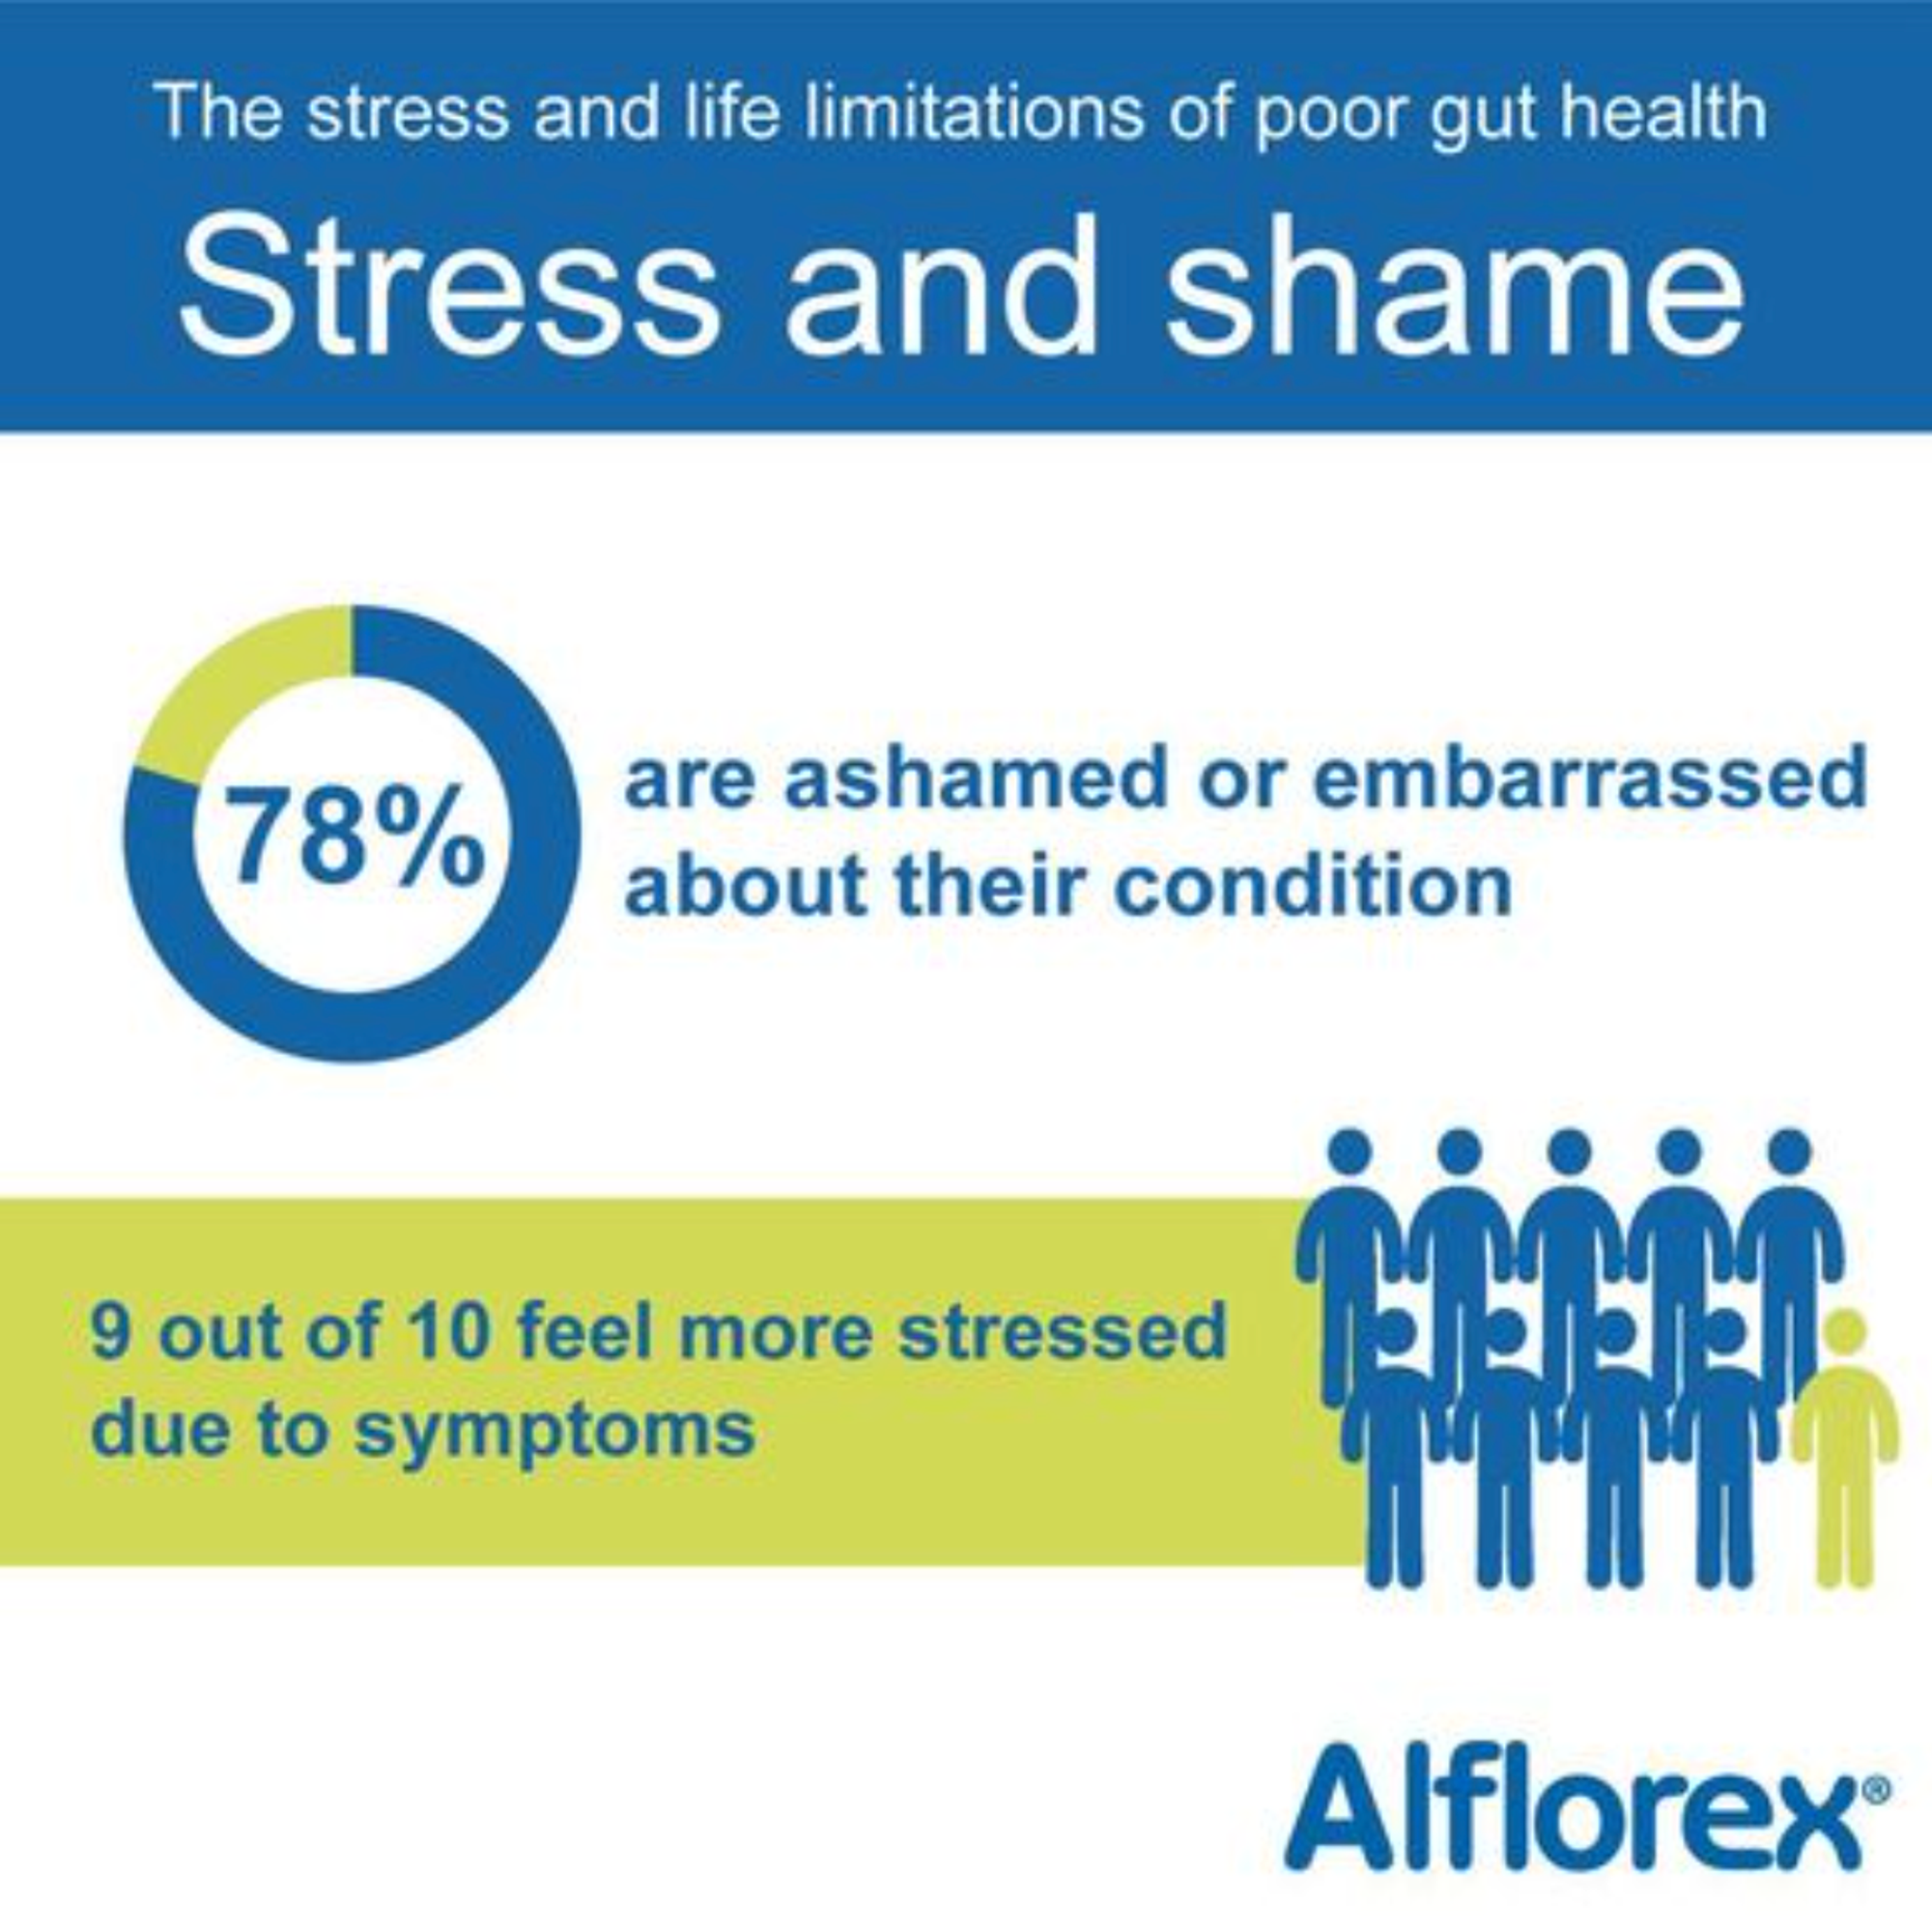 Figure 9: An Instagram post for Alflorex highlighting the stress and shame people feel about having IBS with a piechart and text.